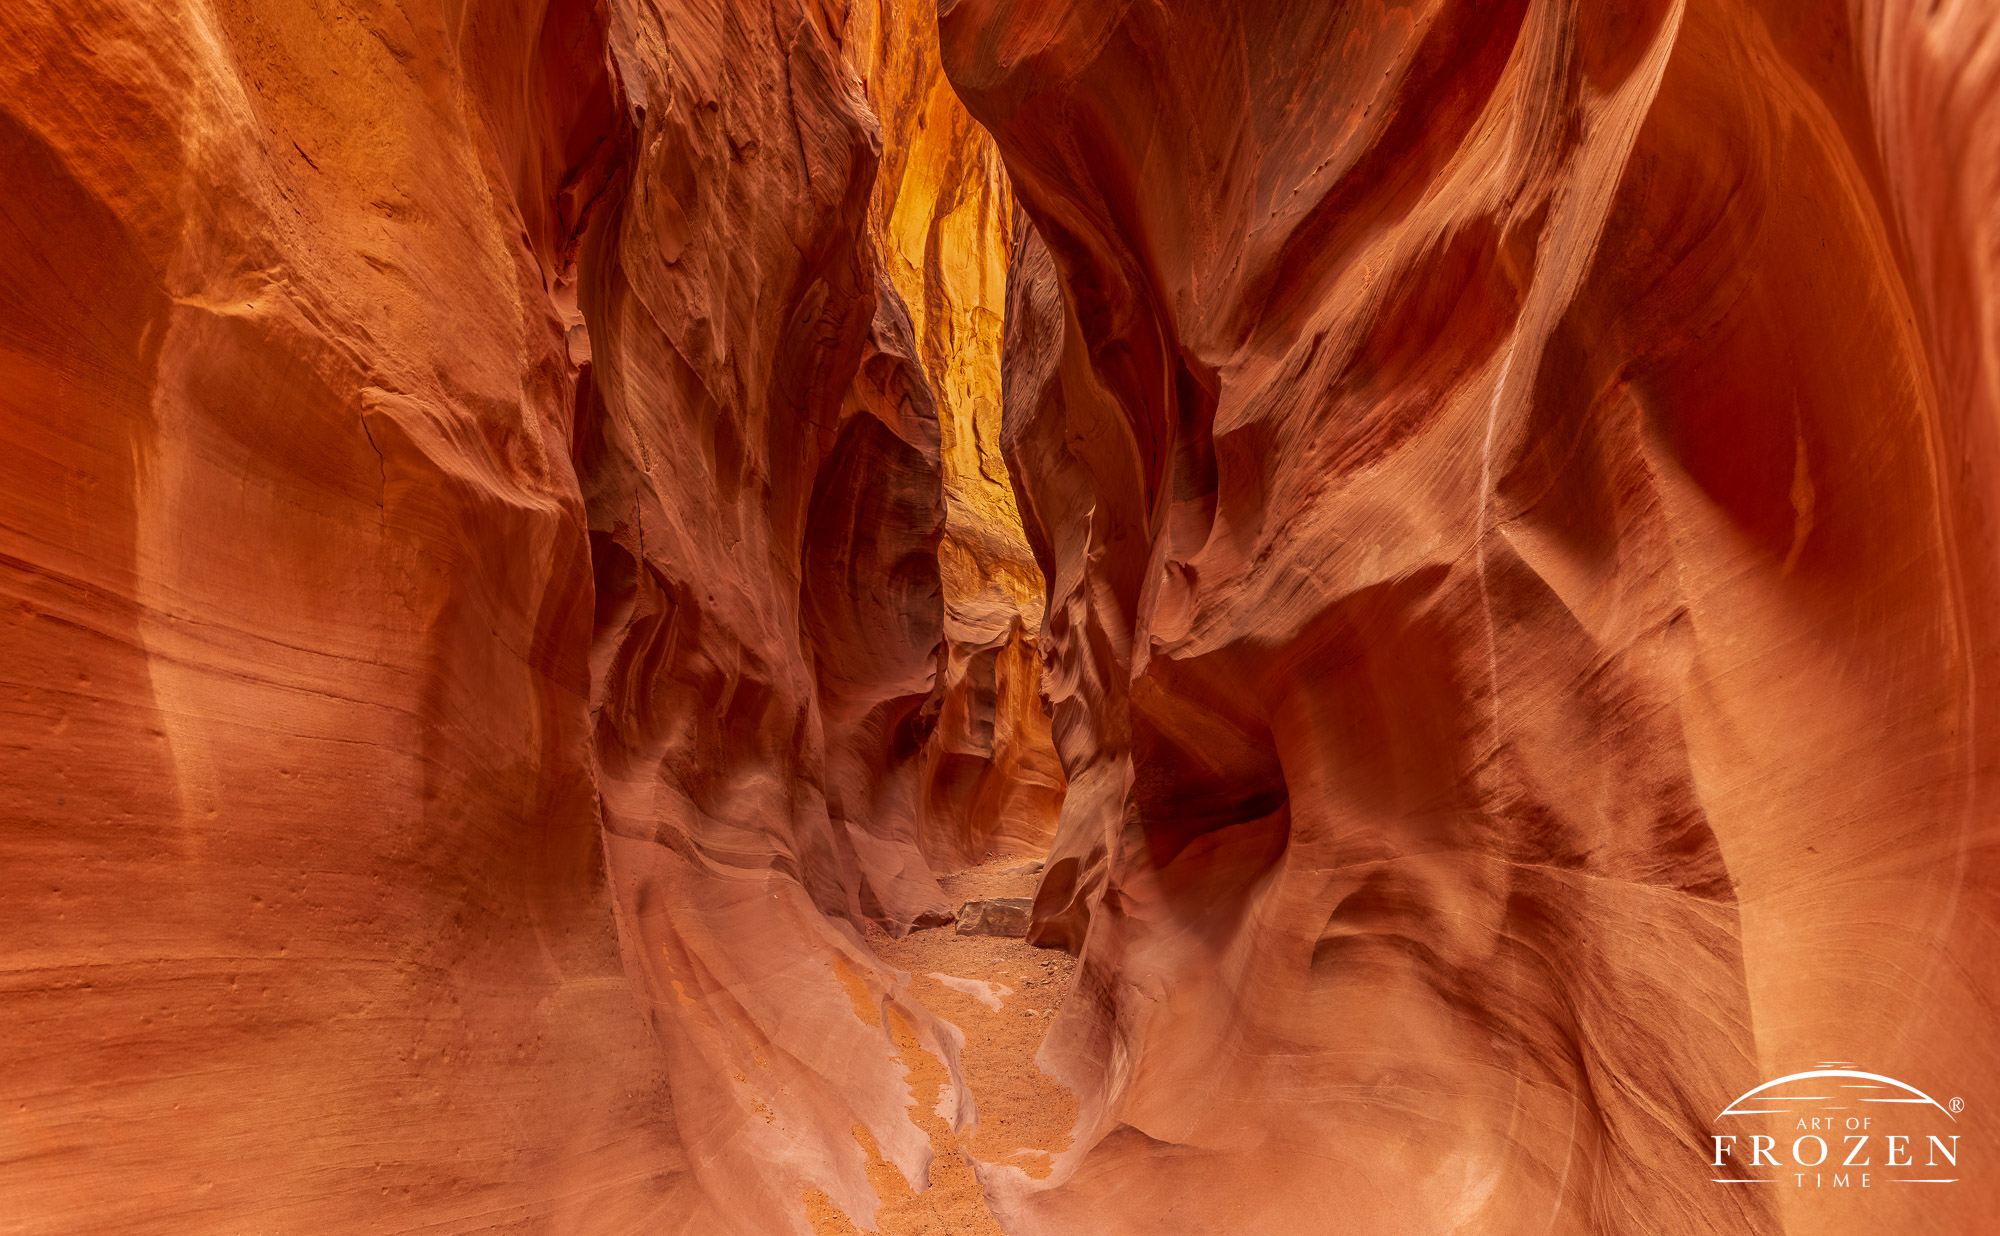 Dry Fork Slot Canyon where erosion created interesting flowing shapes in the Navajo Sandstone that play with light and shadows